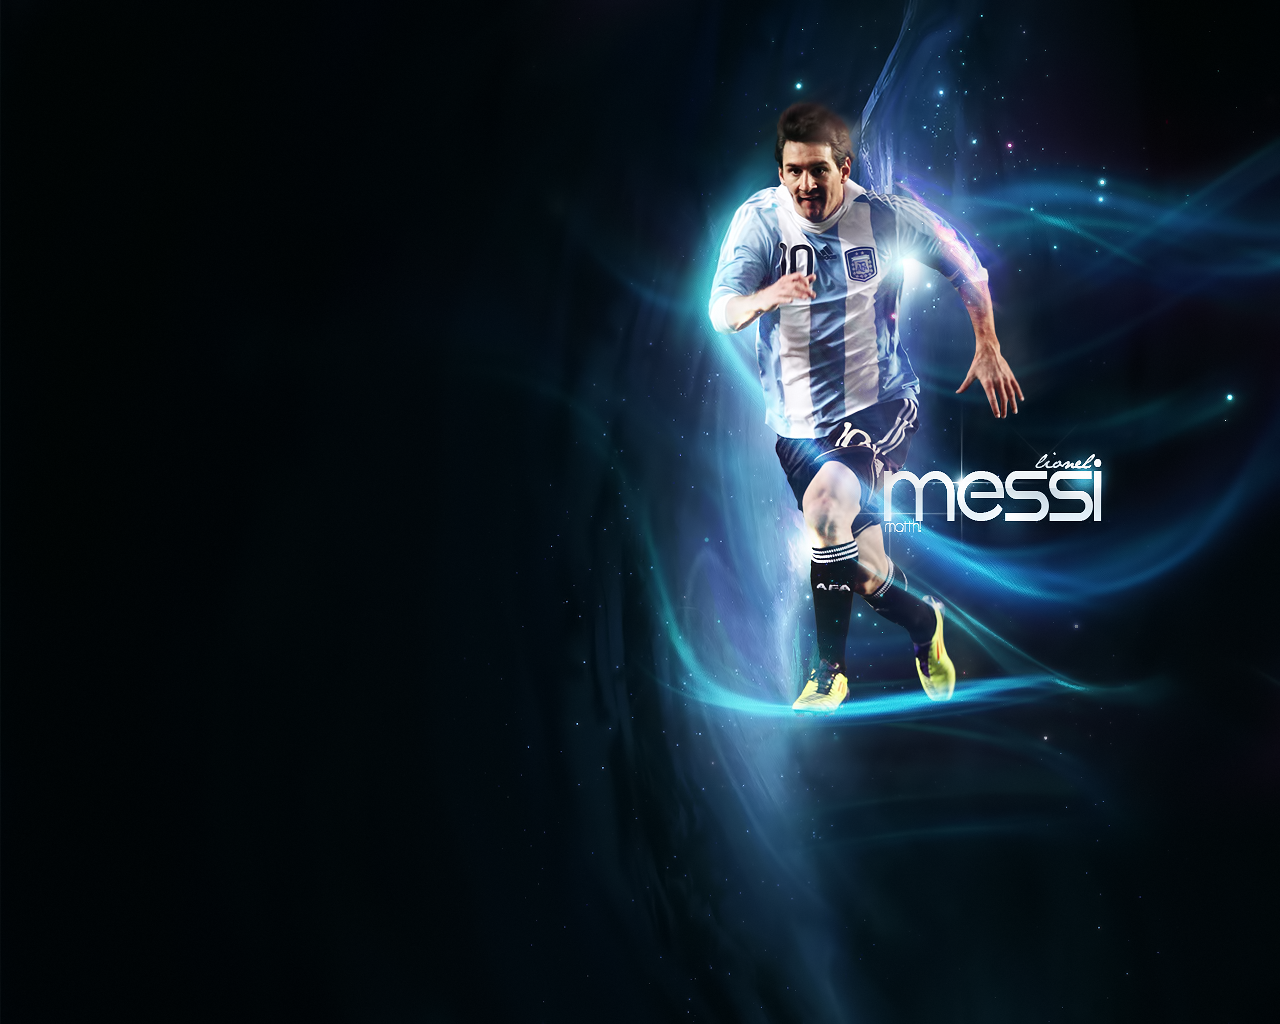 Lionel Messi Wallpaper Image To